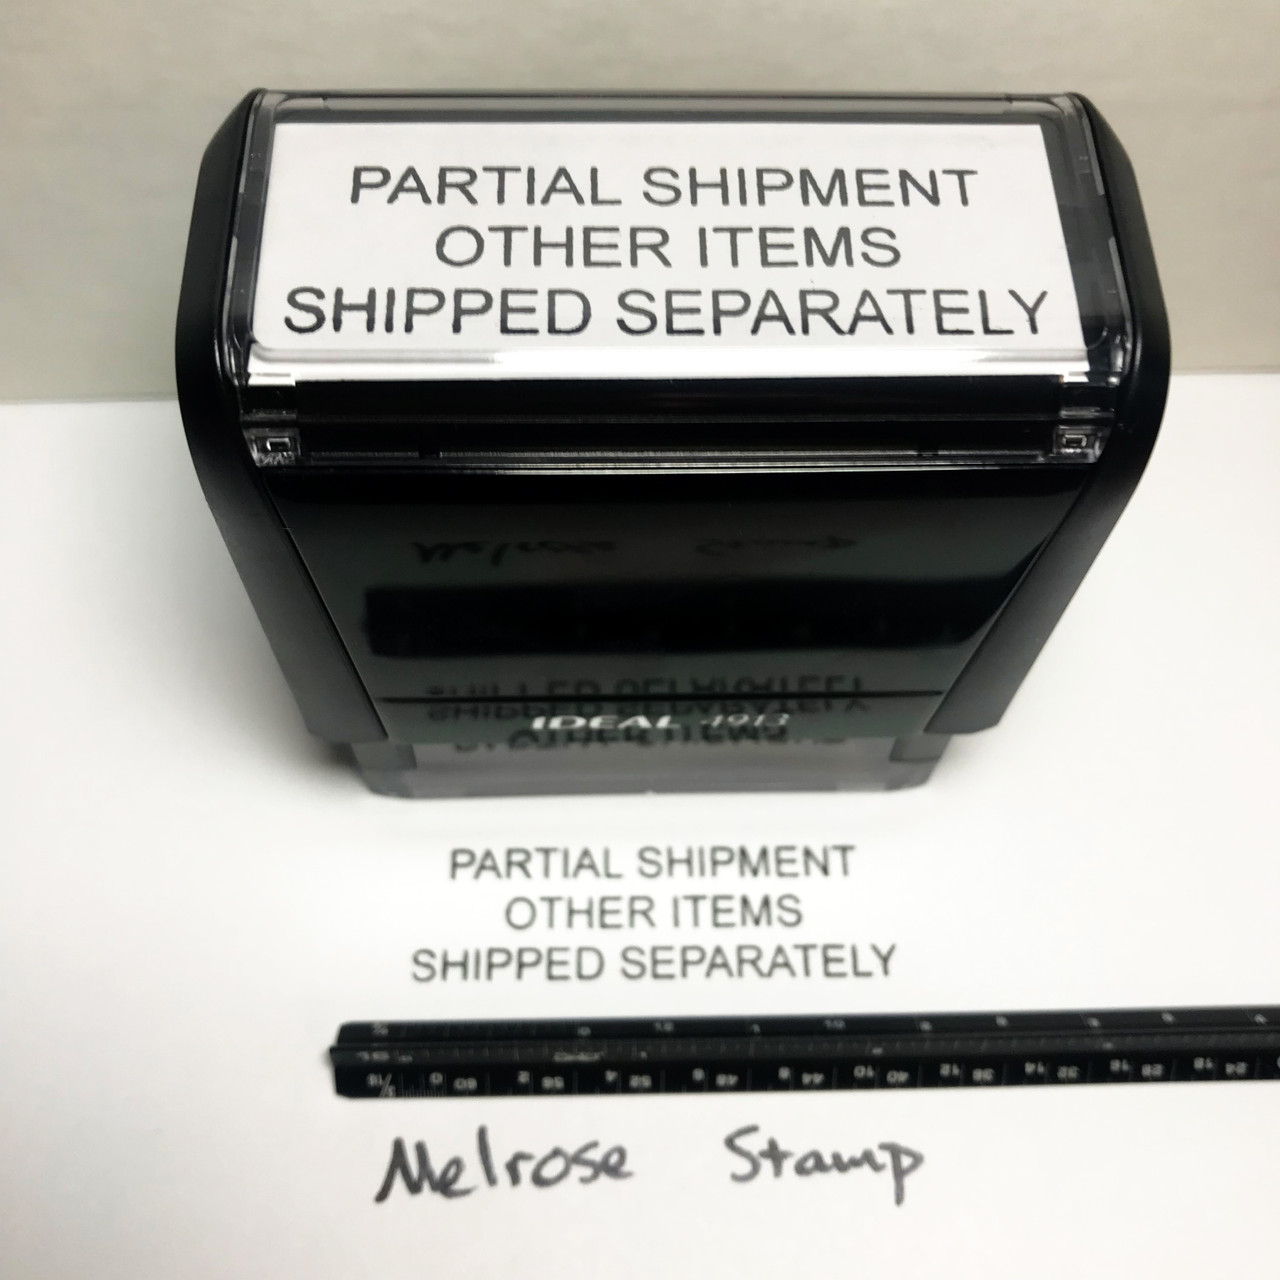 PARTIAL SHIPMENT OTHER ITEMS SHIPPED SEPARATELY Rubber Stamp for mail use self-inking